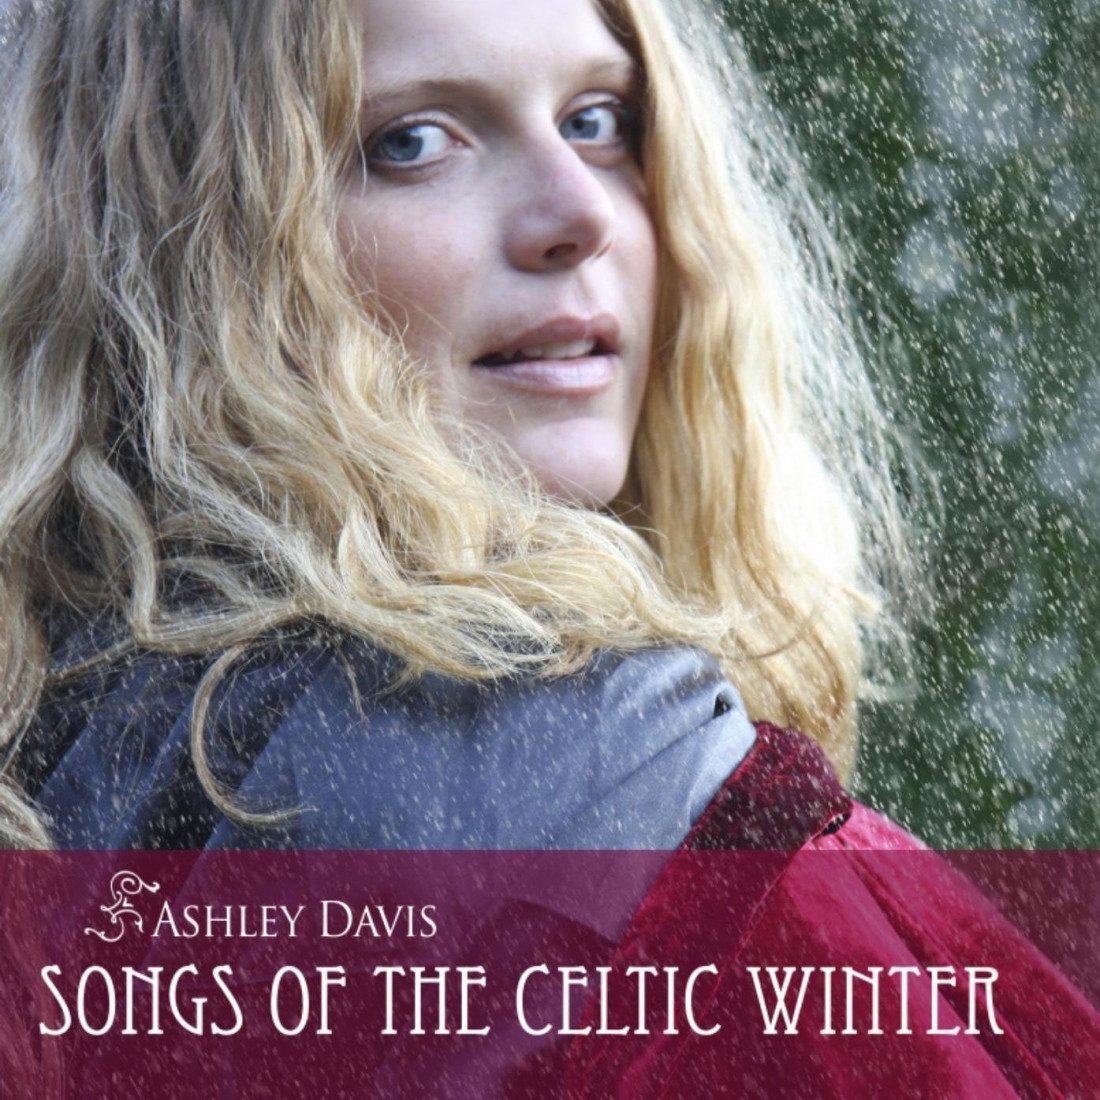 [Ashley Davis] Fare Thee Well (Songs Of The Celtic Winter) Photo-Image